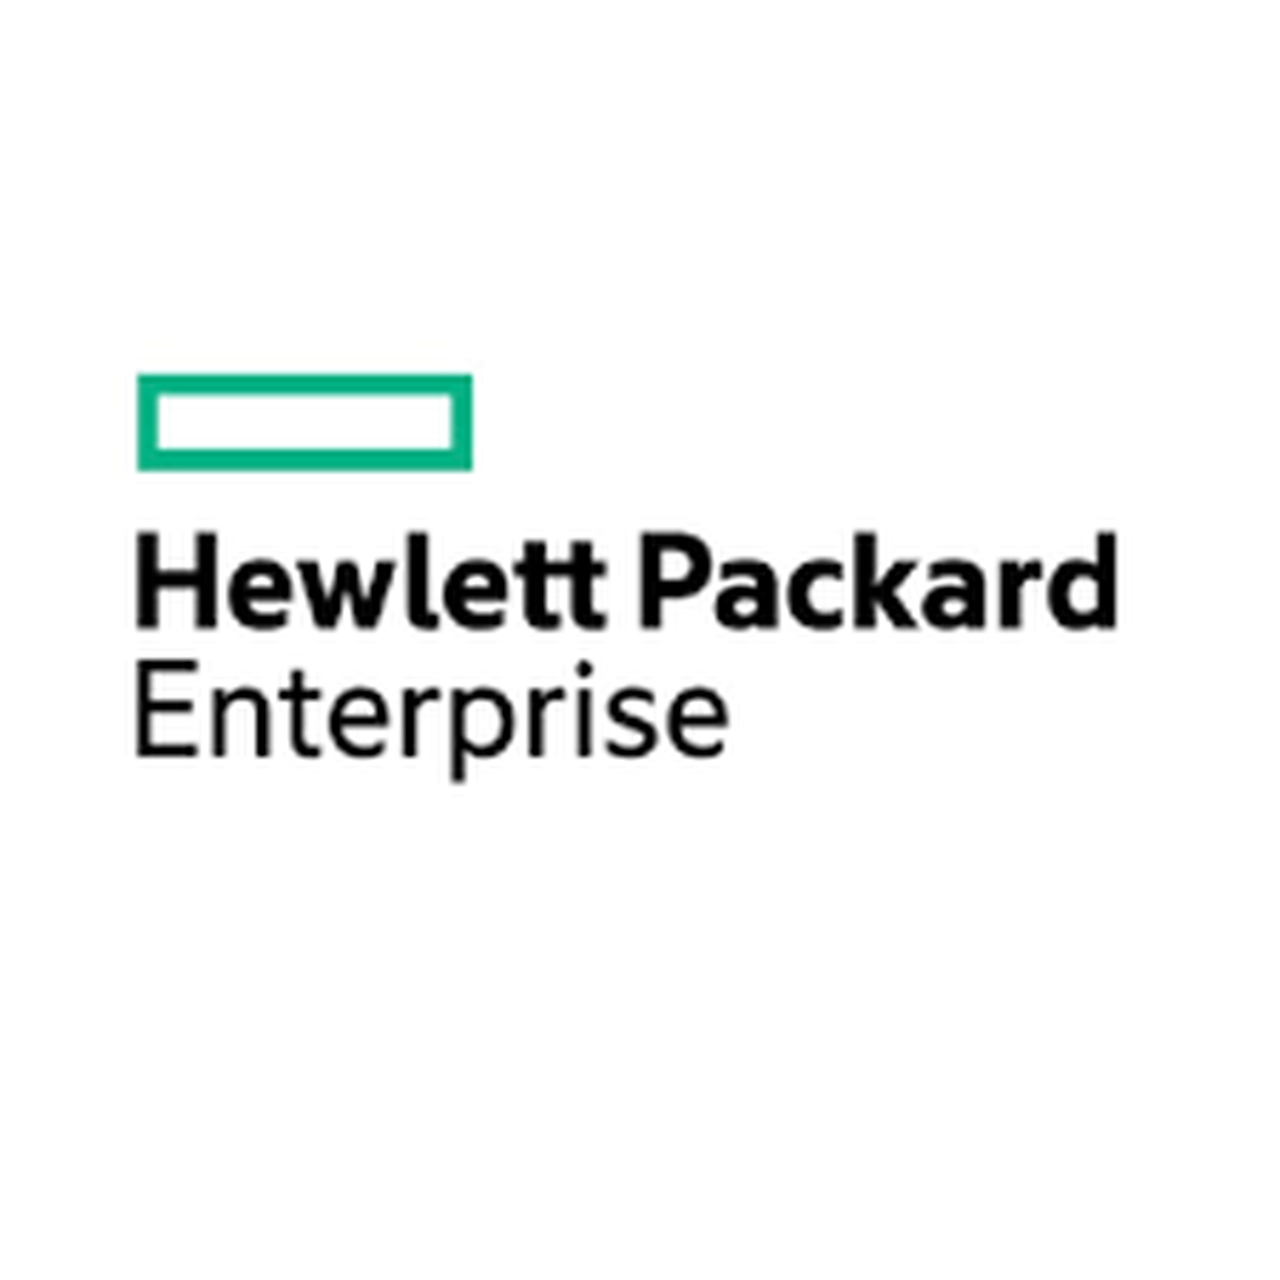 HPE 1 Year Post Warranty Proactive Care, Next Business Day wDMR BL680c G7 Service